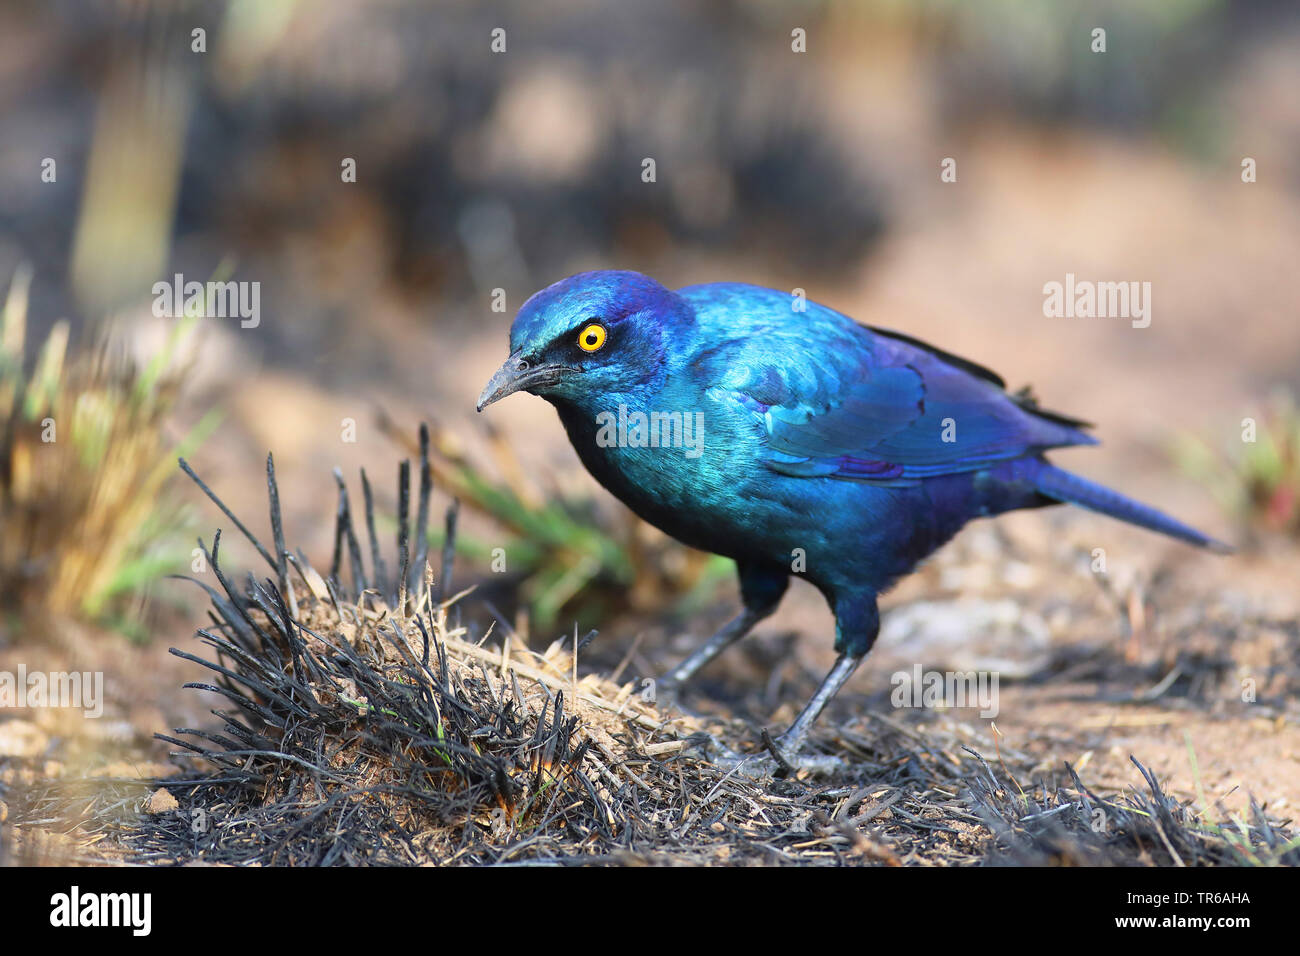 red-shouldered glossy starling (Lamprotornis nitens), searching for food on the ground, South Africa, North West Province, Pilanesberg National Park Stock Photo